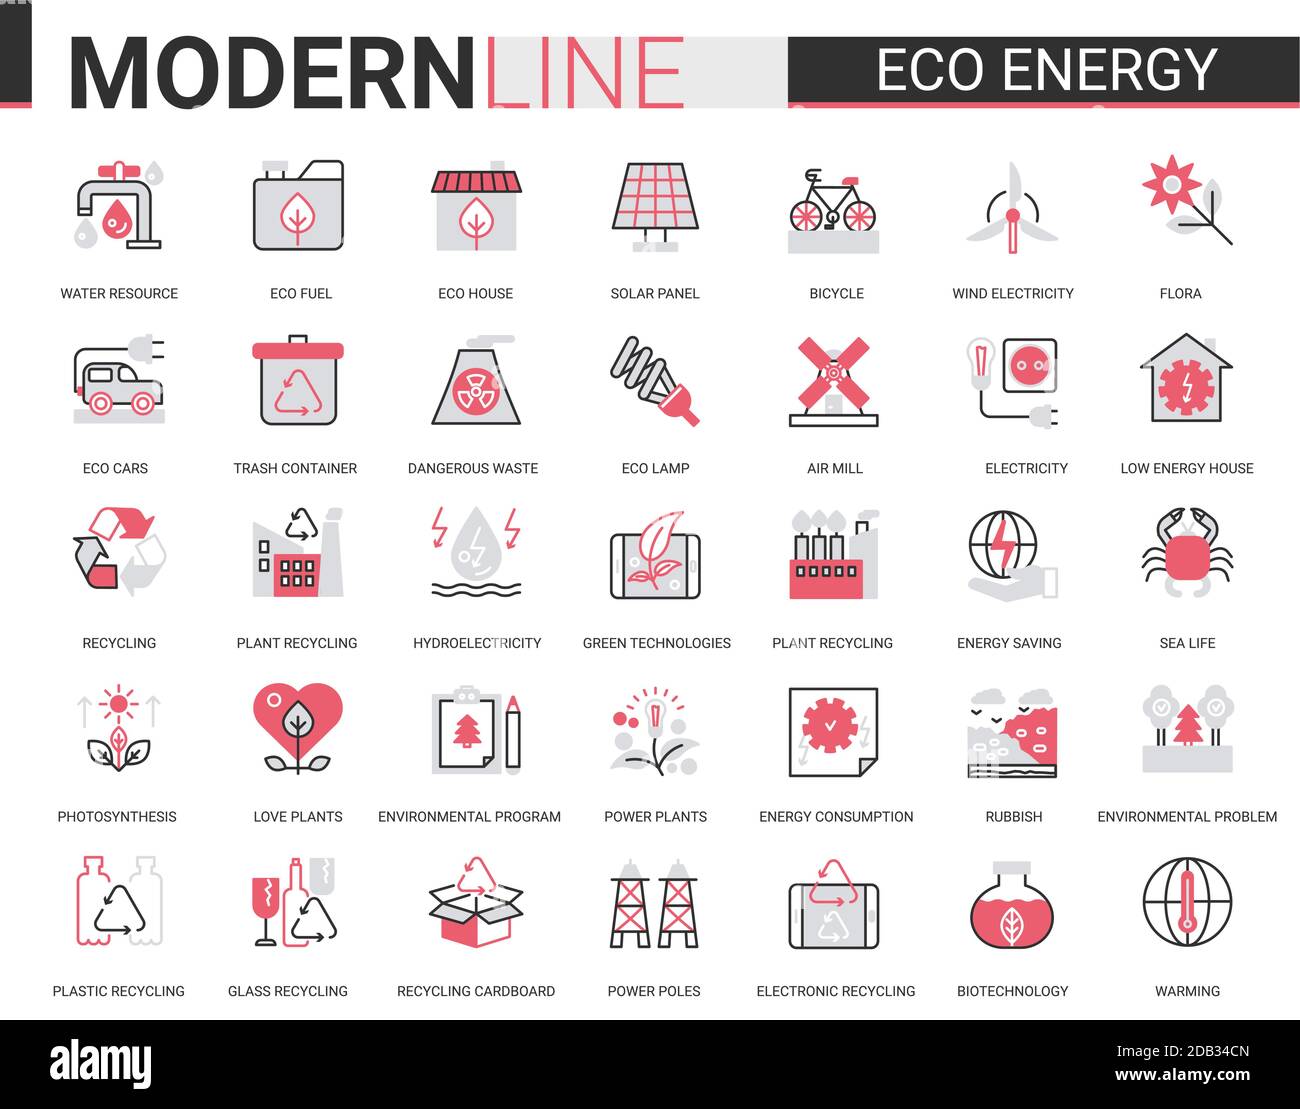 Eco energy flat line icon vector illustration set. Red black website design collection of ecology problems linear symbols, environmental ecosystem protection and green waste recycling technology Stock Vector